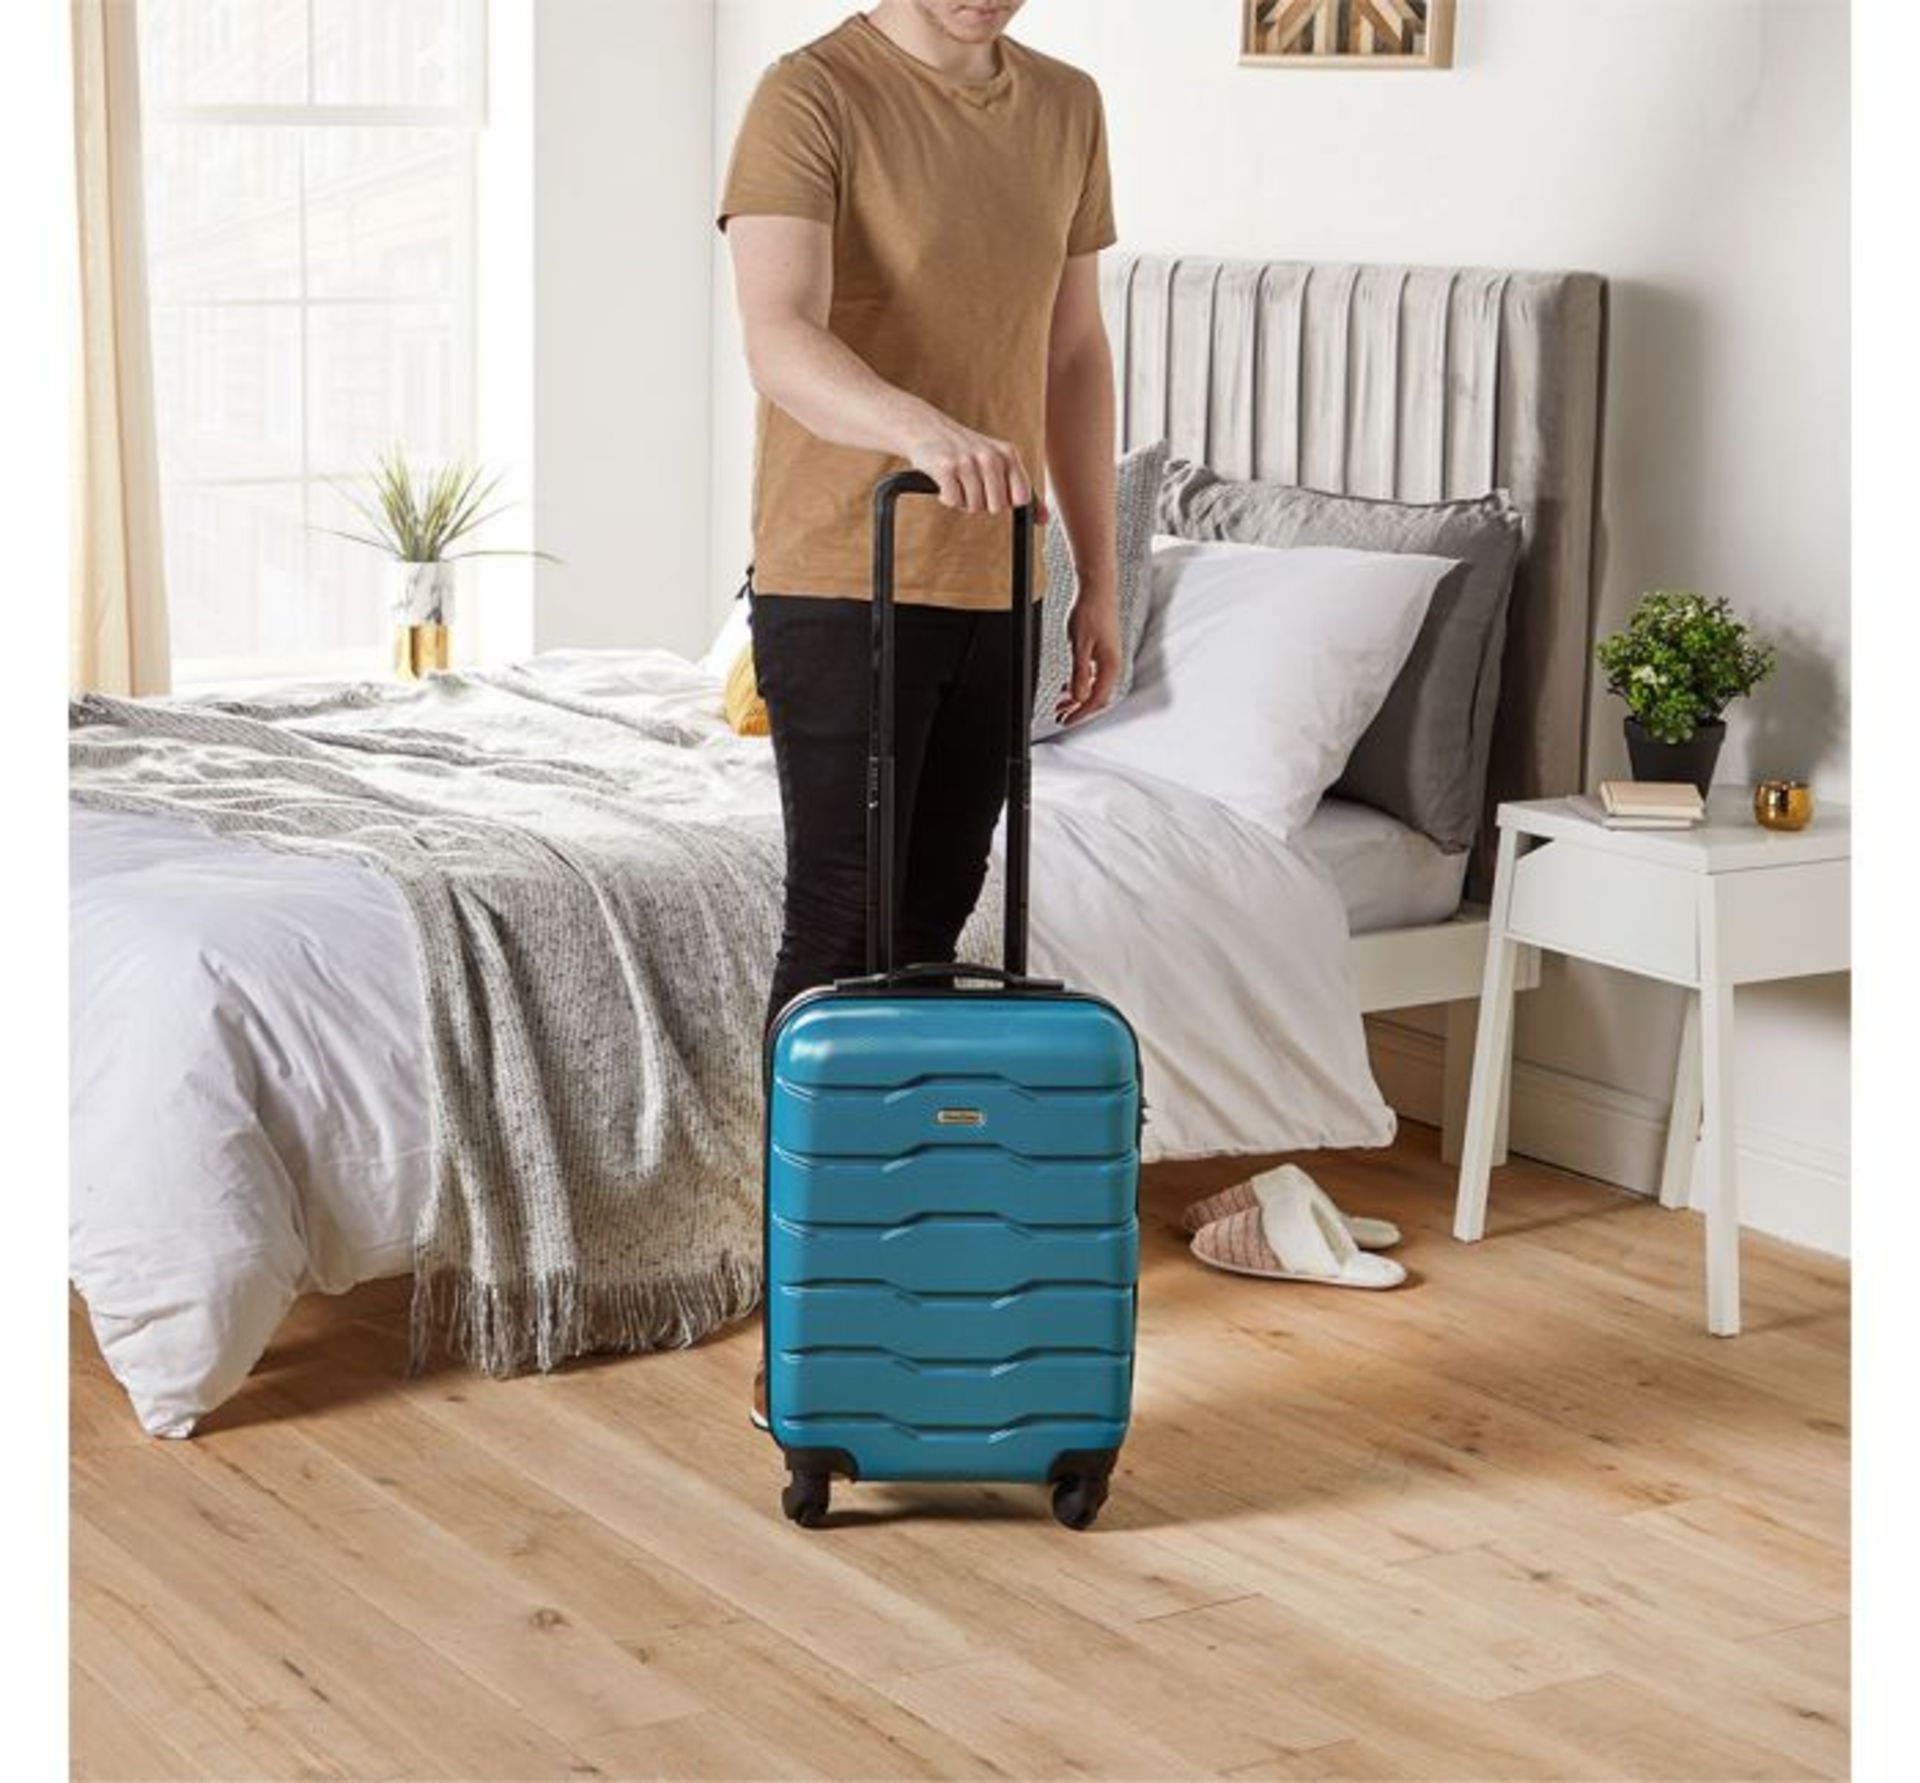 (HZ5) Teal Cabin Bag Fits most budget airlines baggage restrictions including Ryanair, EasyJet,